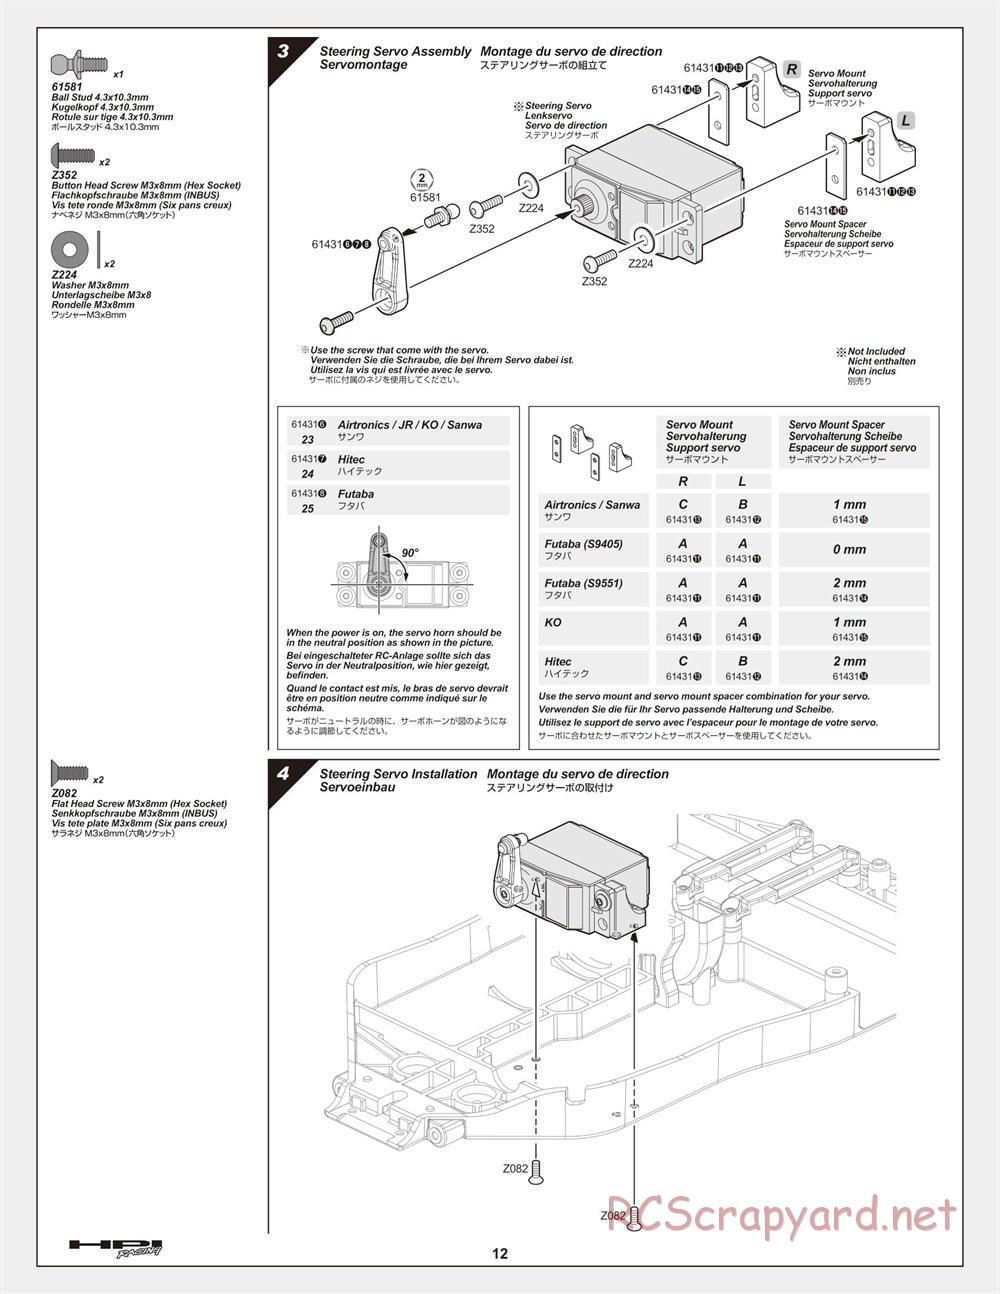 HPI - Cyber 10B - Manual - Page 12